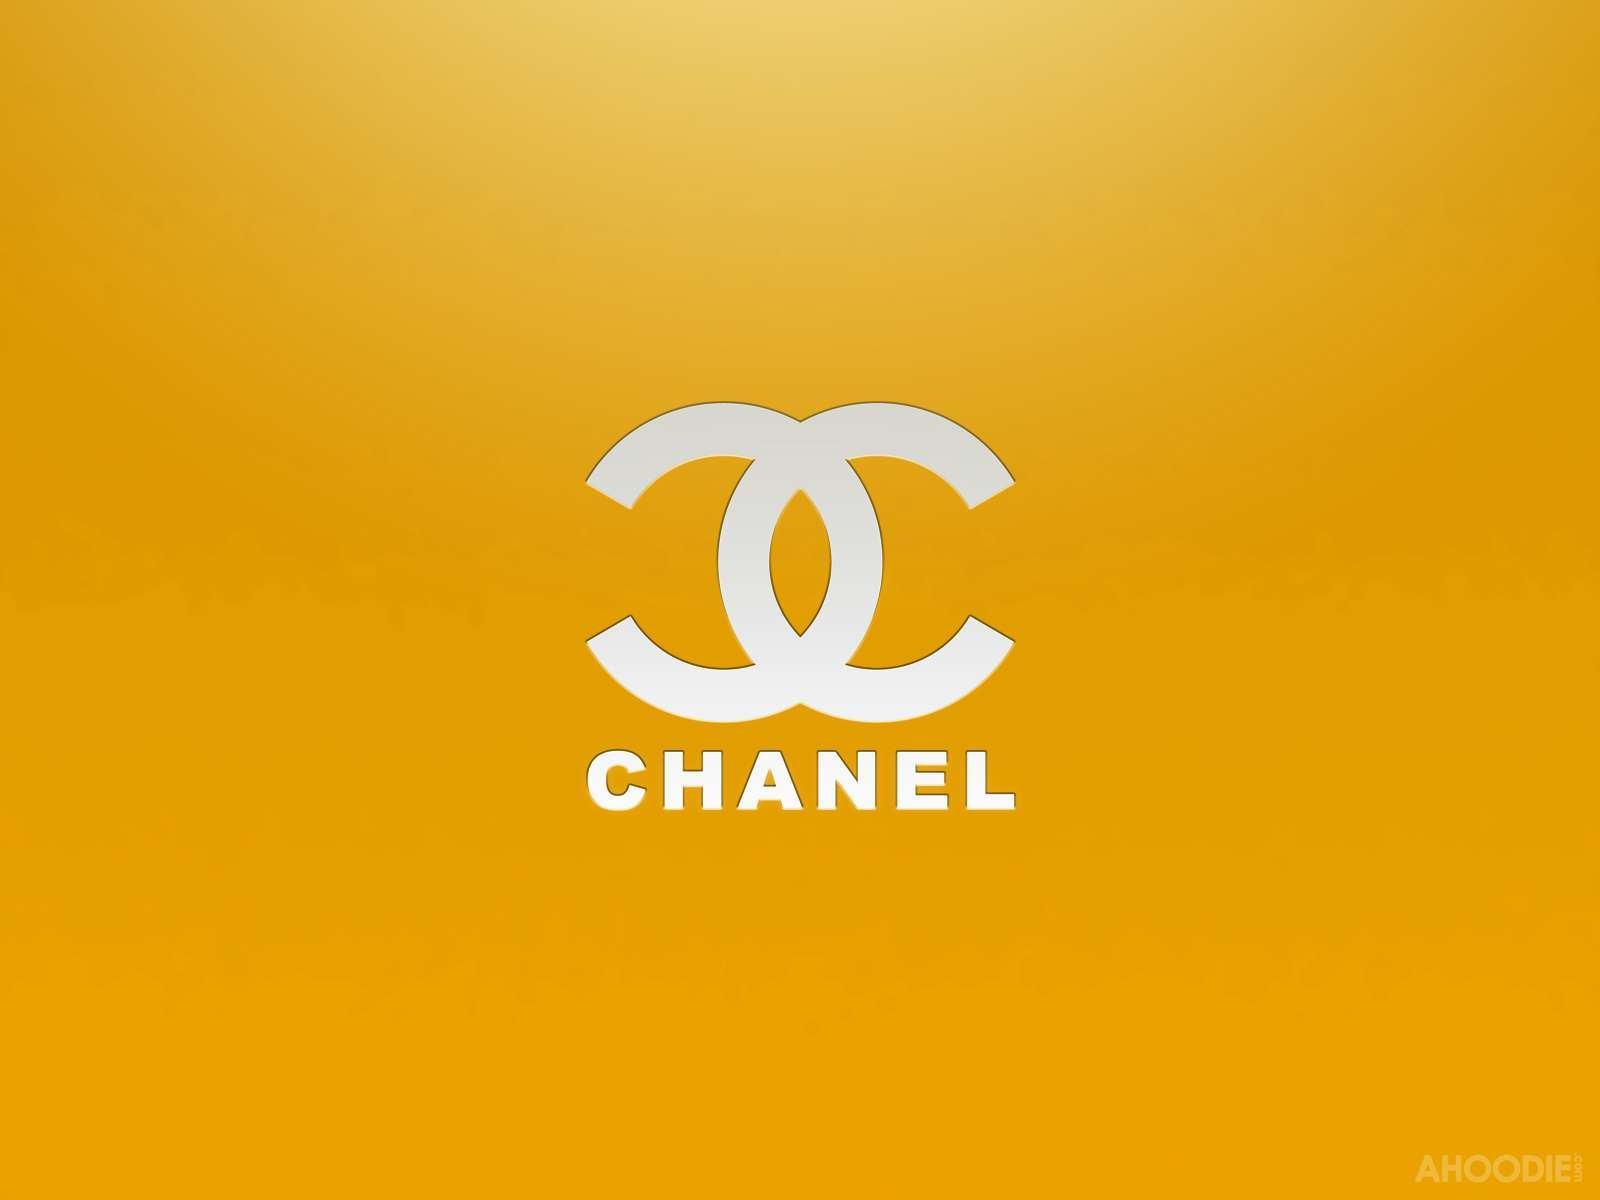 Coco Chanel Laptop Wallpapers Wallpaper Cave